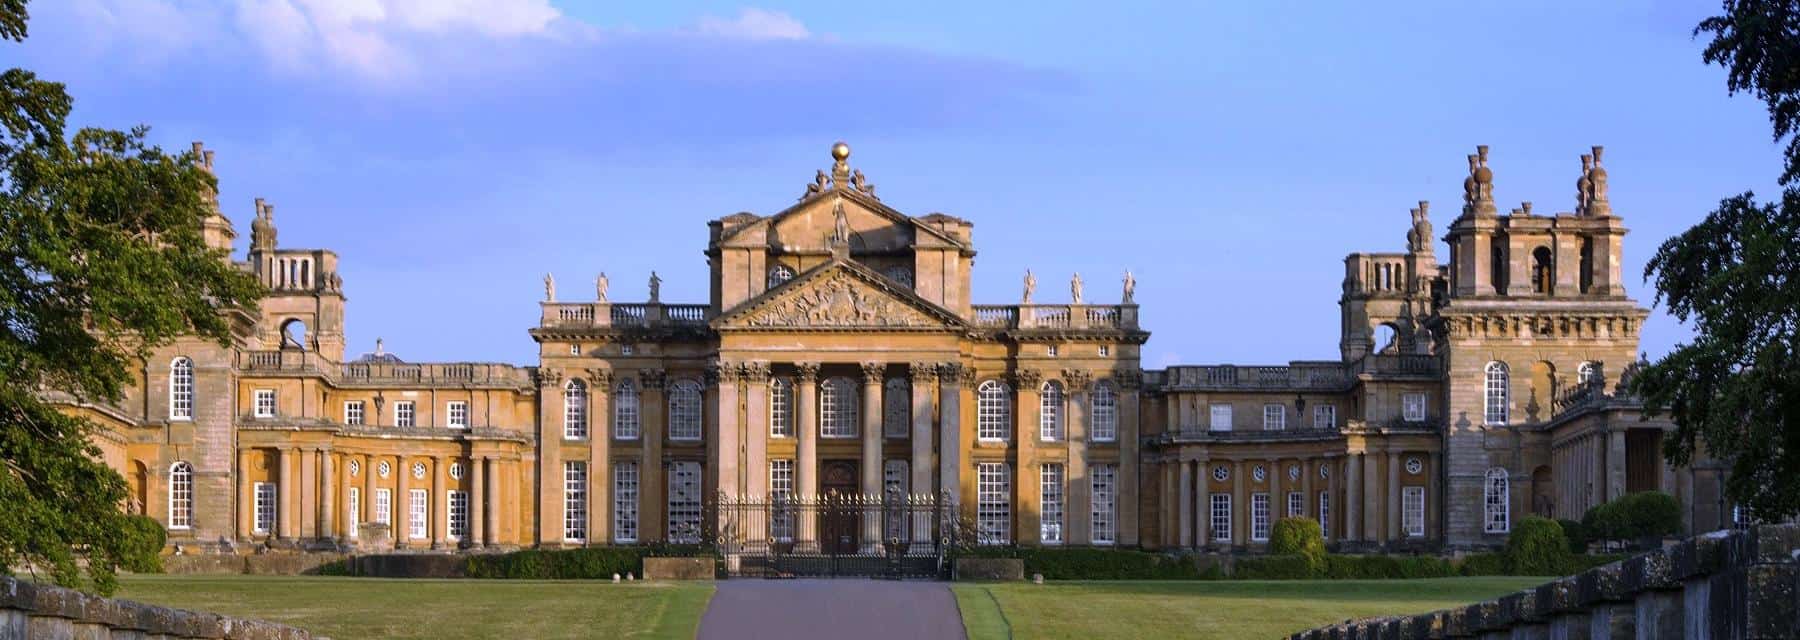 blenheim palace in oxfordshire